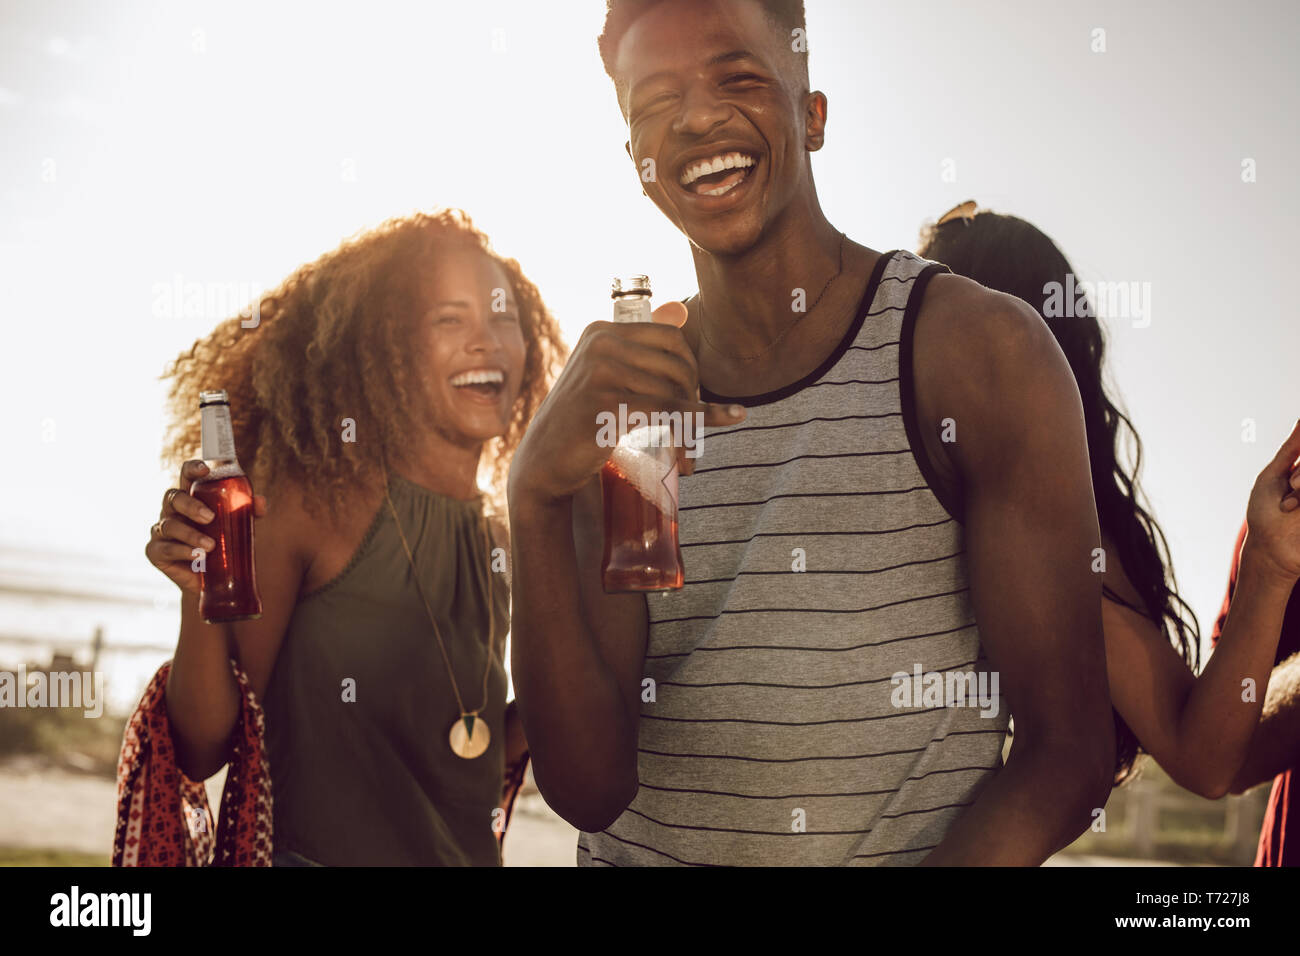 Smiling young guy with friends dancing outdoors on a sunny day. Diverse group of friends chilling out on a their weekend. Stock Photo